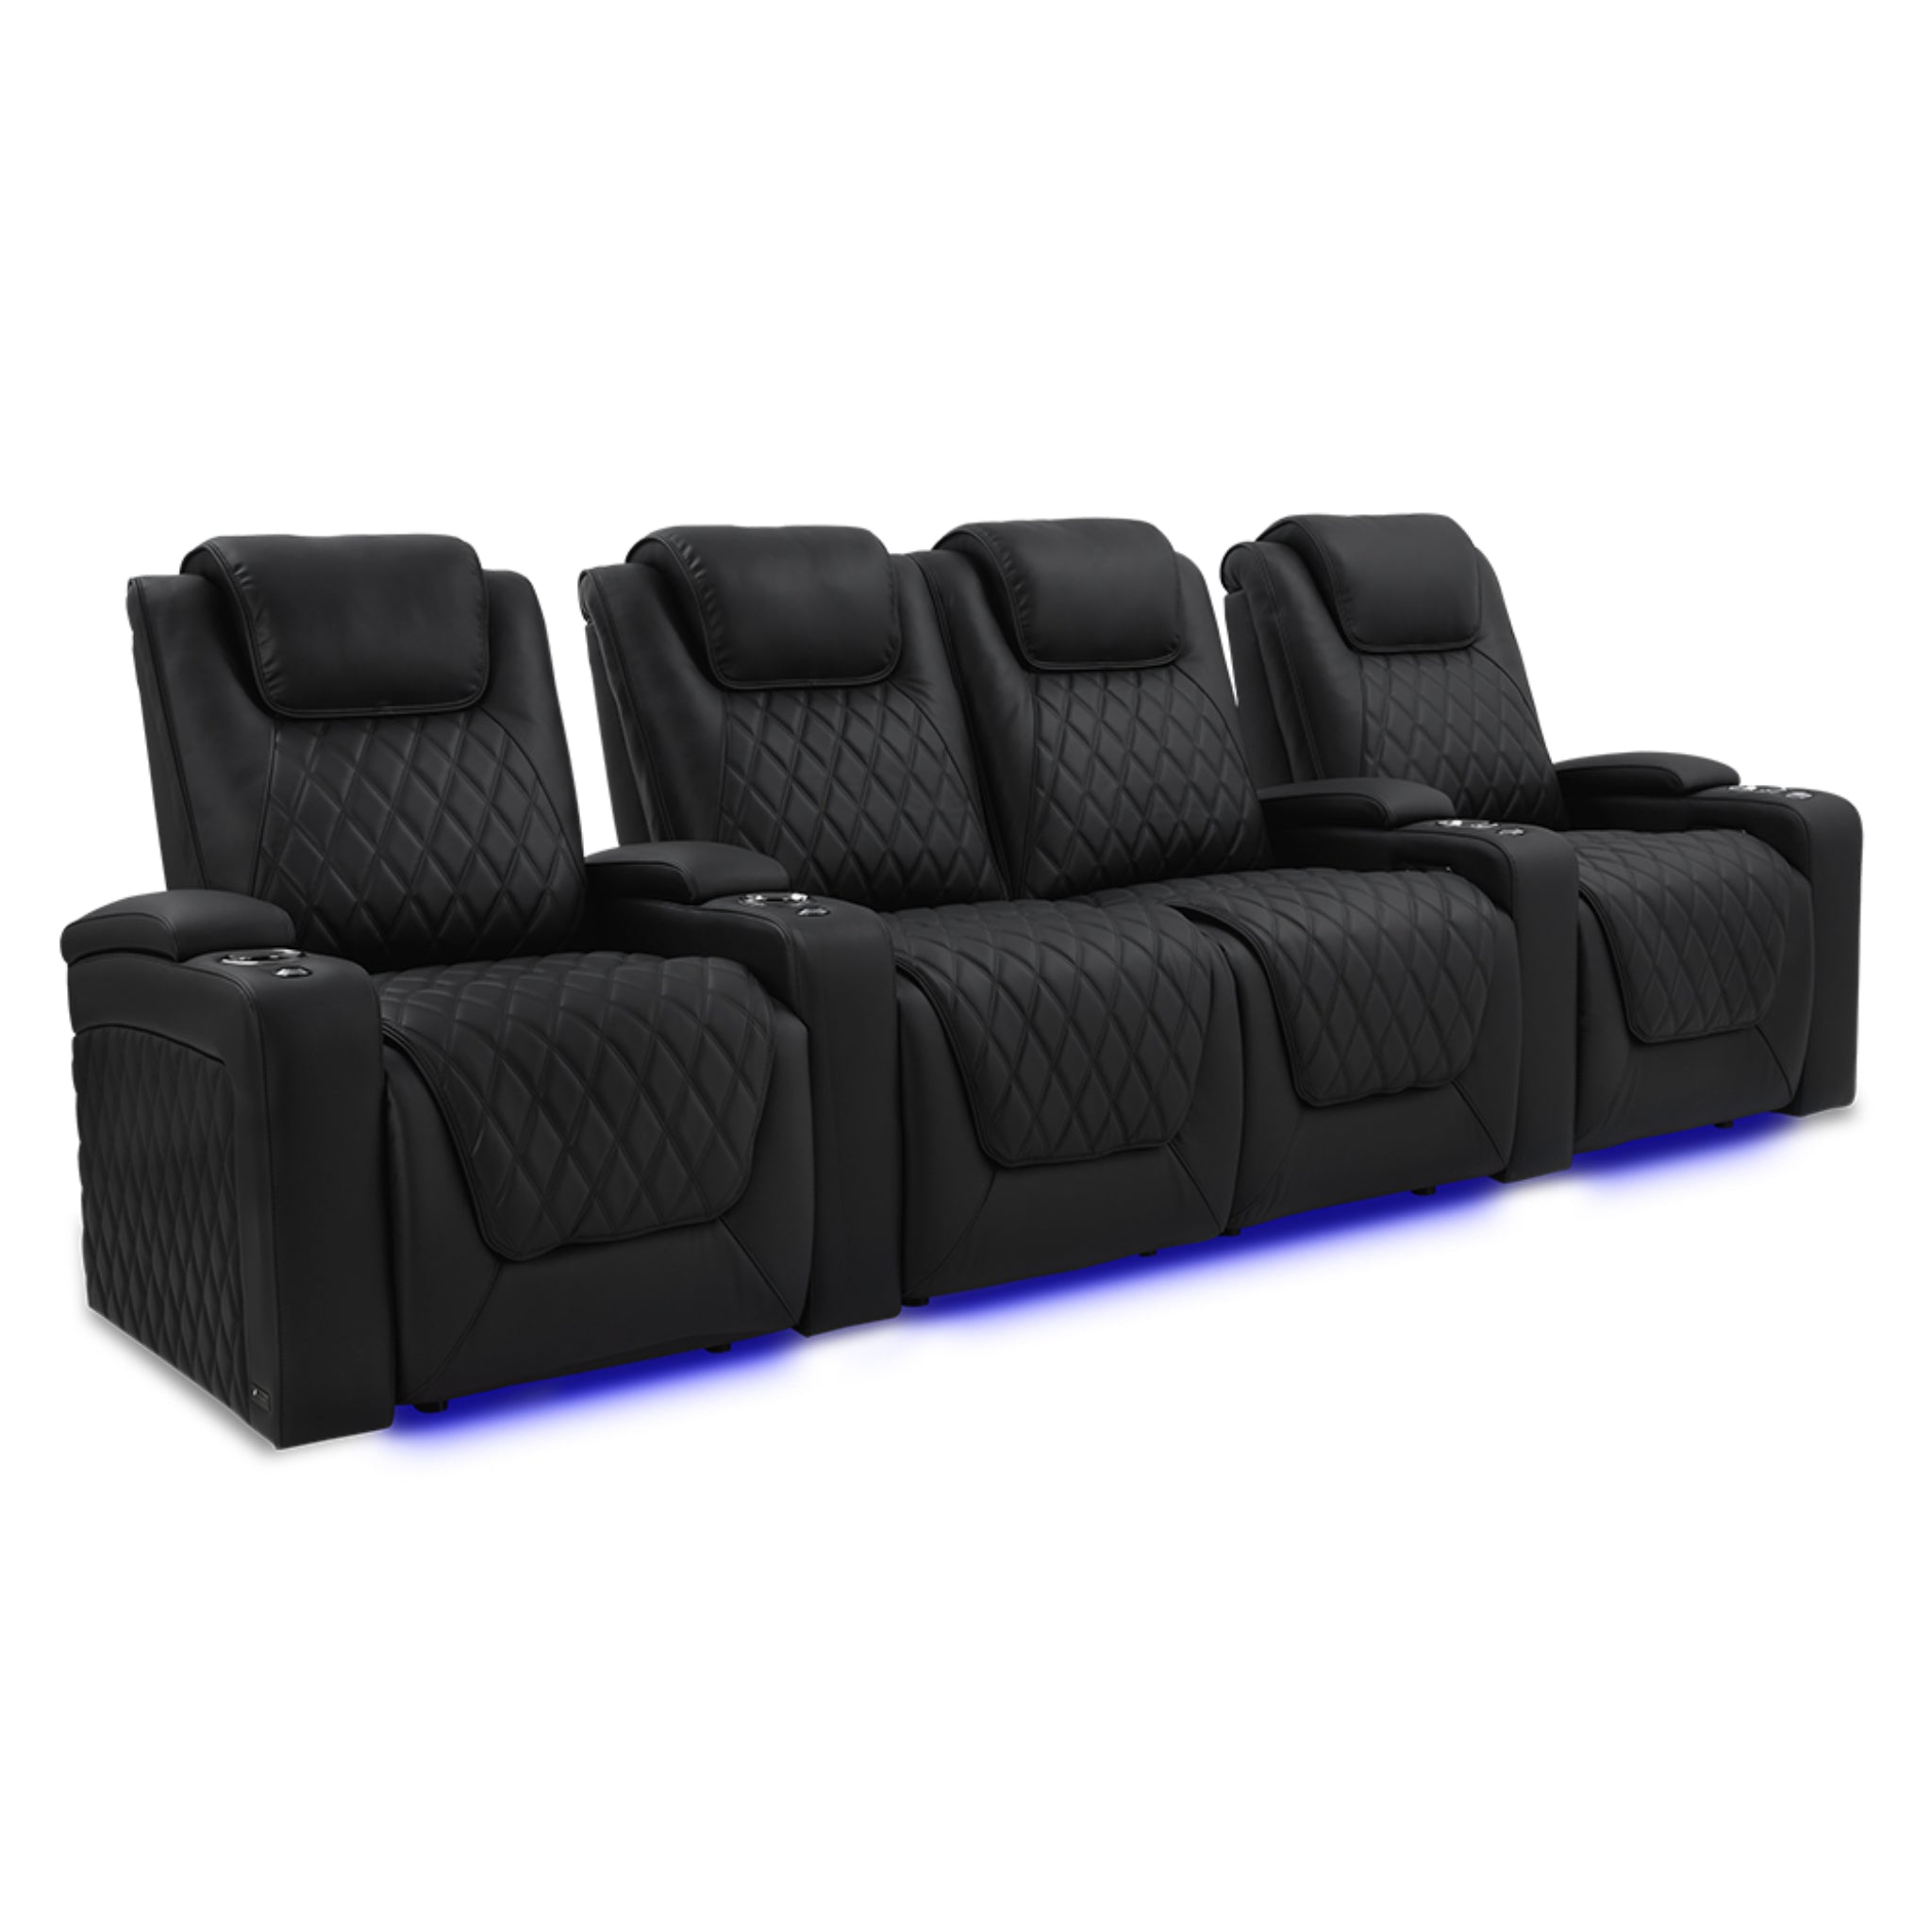 Valencia Theater Seating Oslo Luxury Edition Home Theater Seating